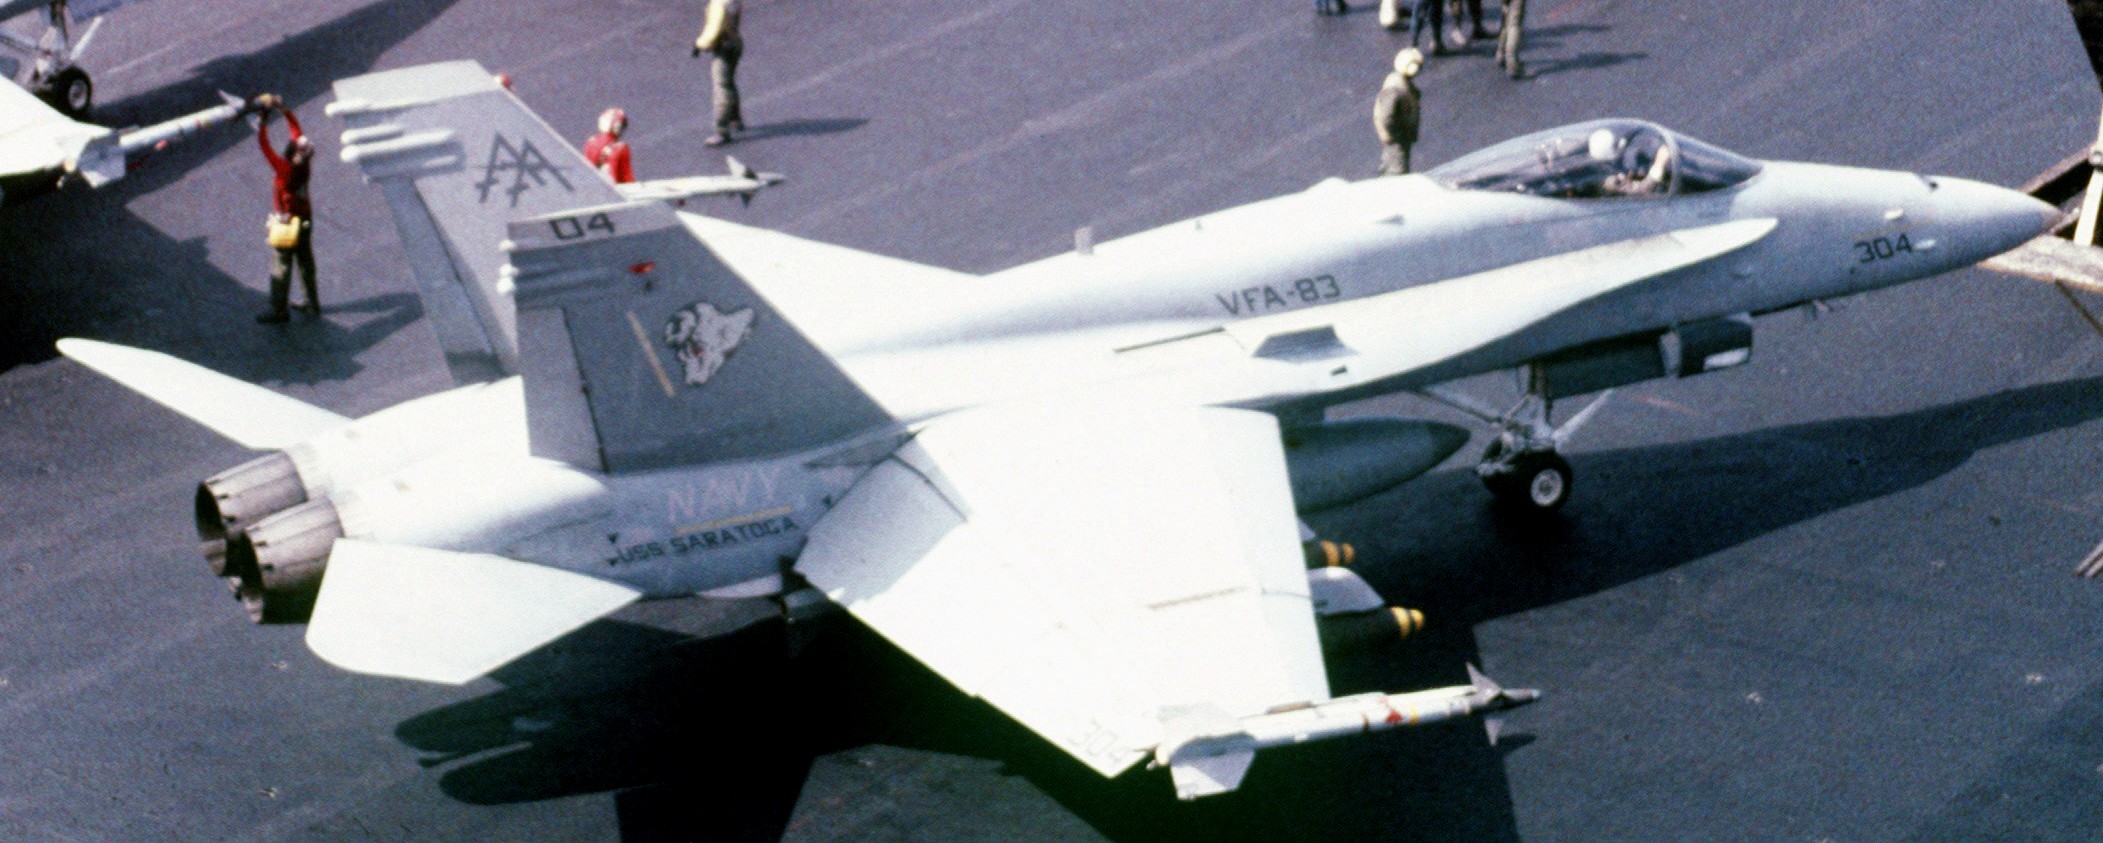 vfa-83 rampagers strike fighter squadron f/a-18c hornet cvw-17 uss saratoga cv-60 151